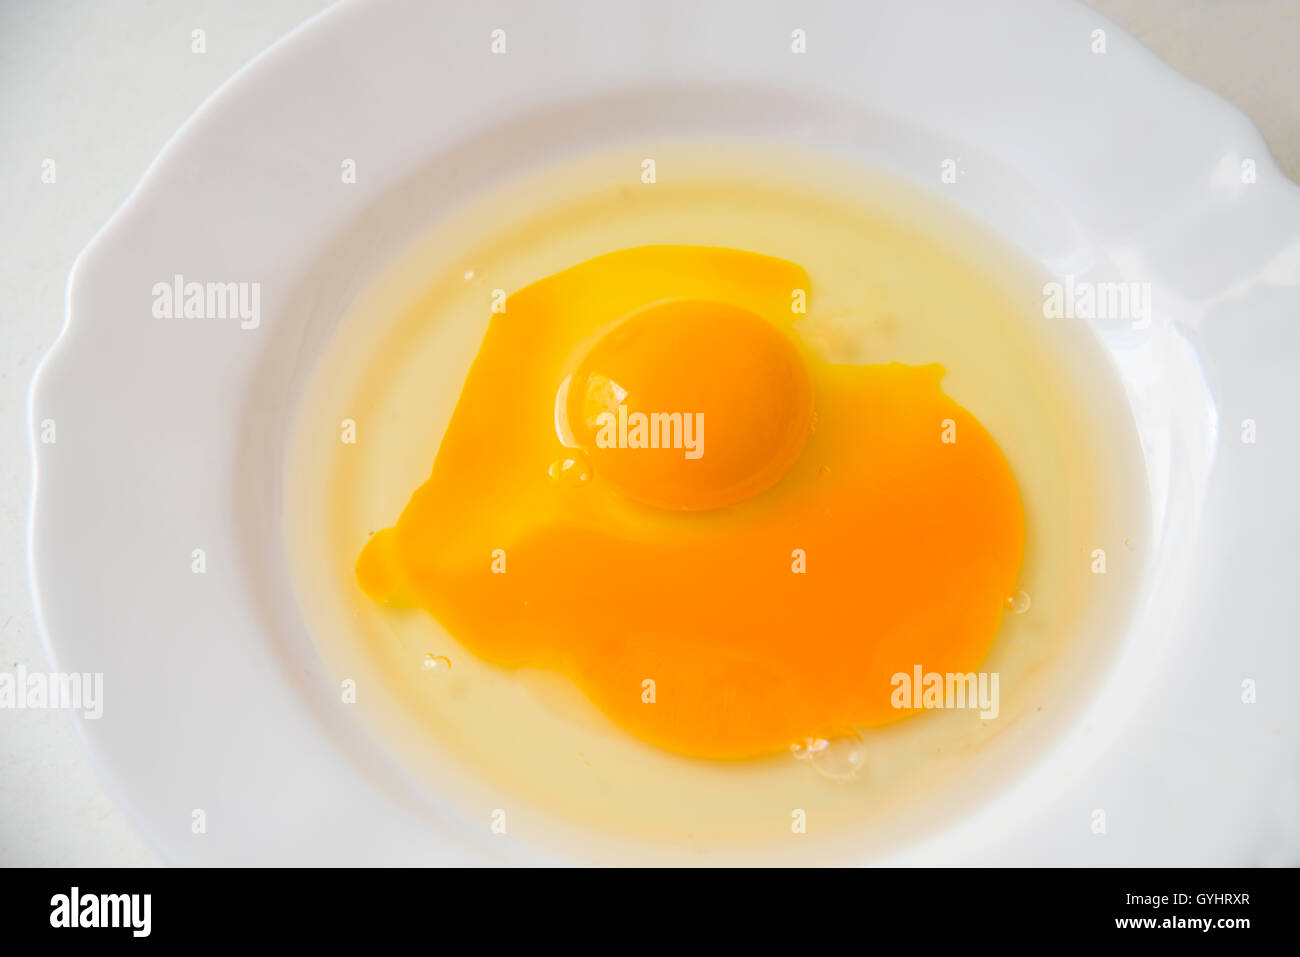 Two eggs in a dish, one of them with broken yolk. Stock Photo